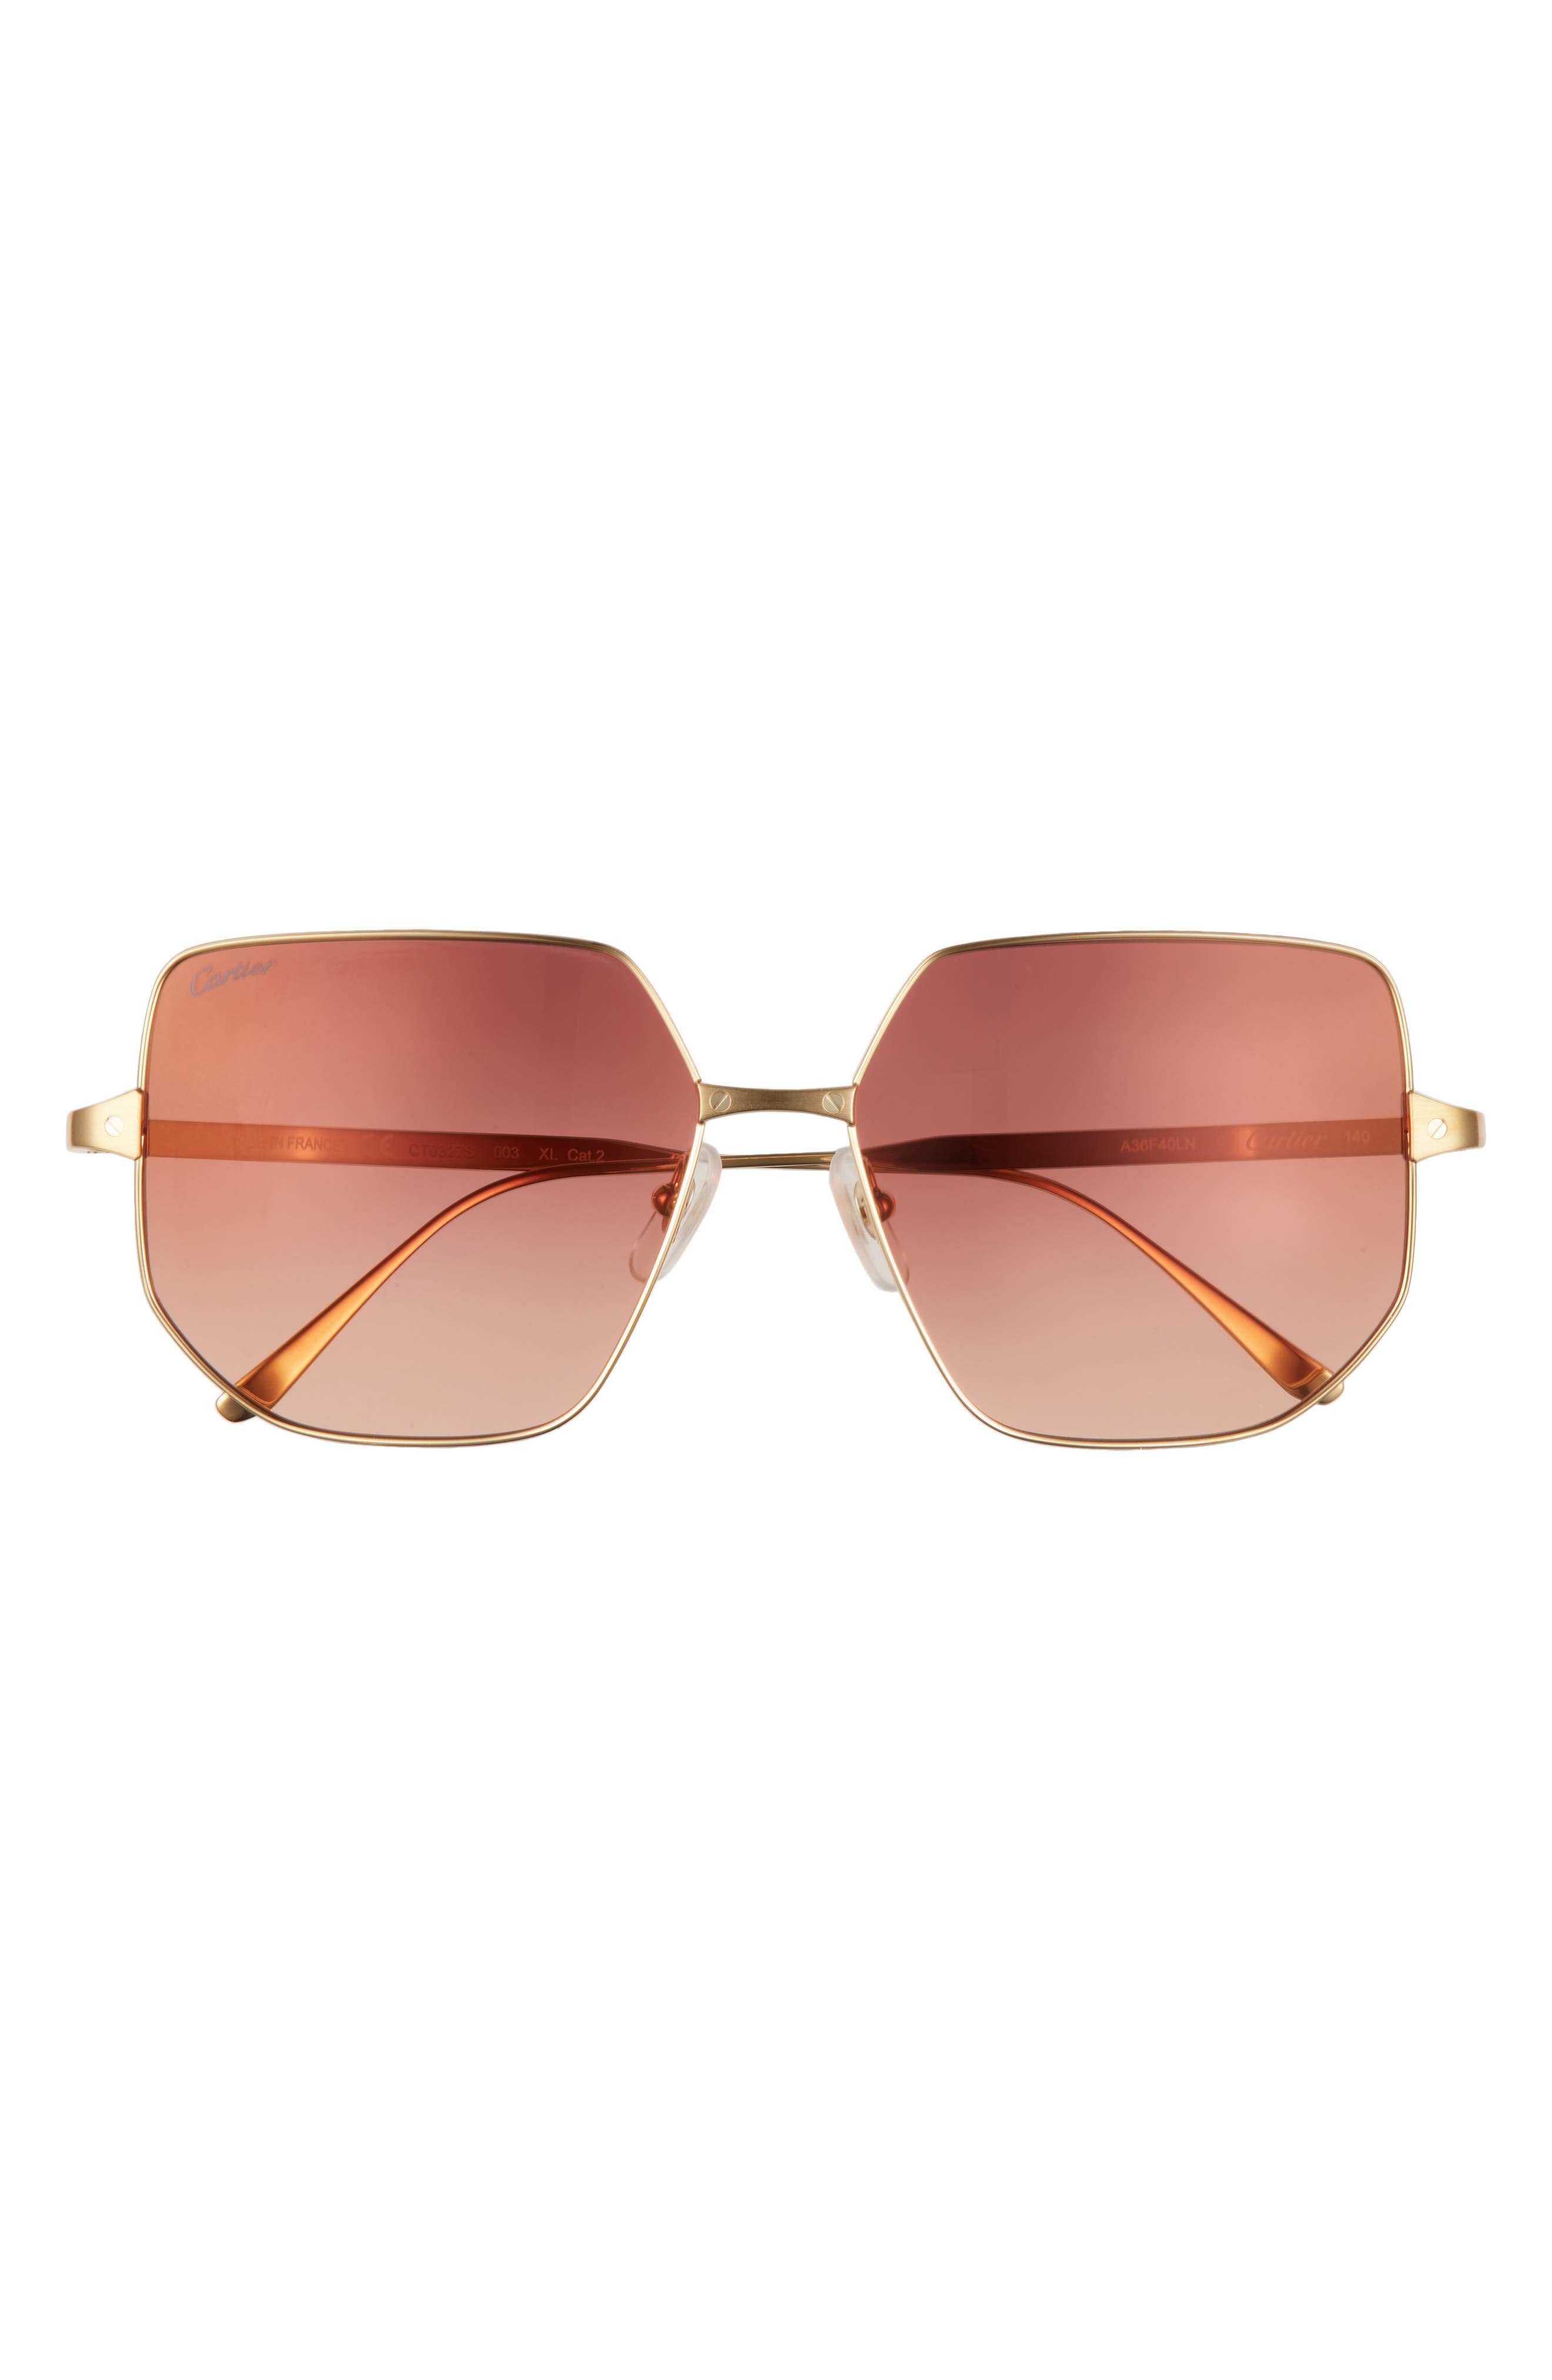 Cartier Polarized Square Sunglasses in Gold/pink at Nordstrom